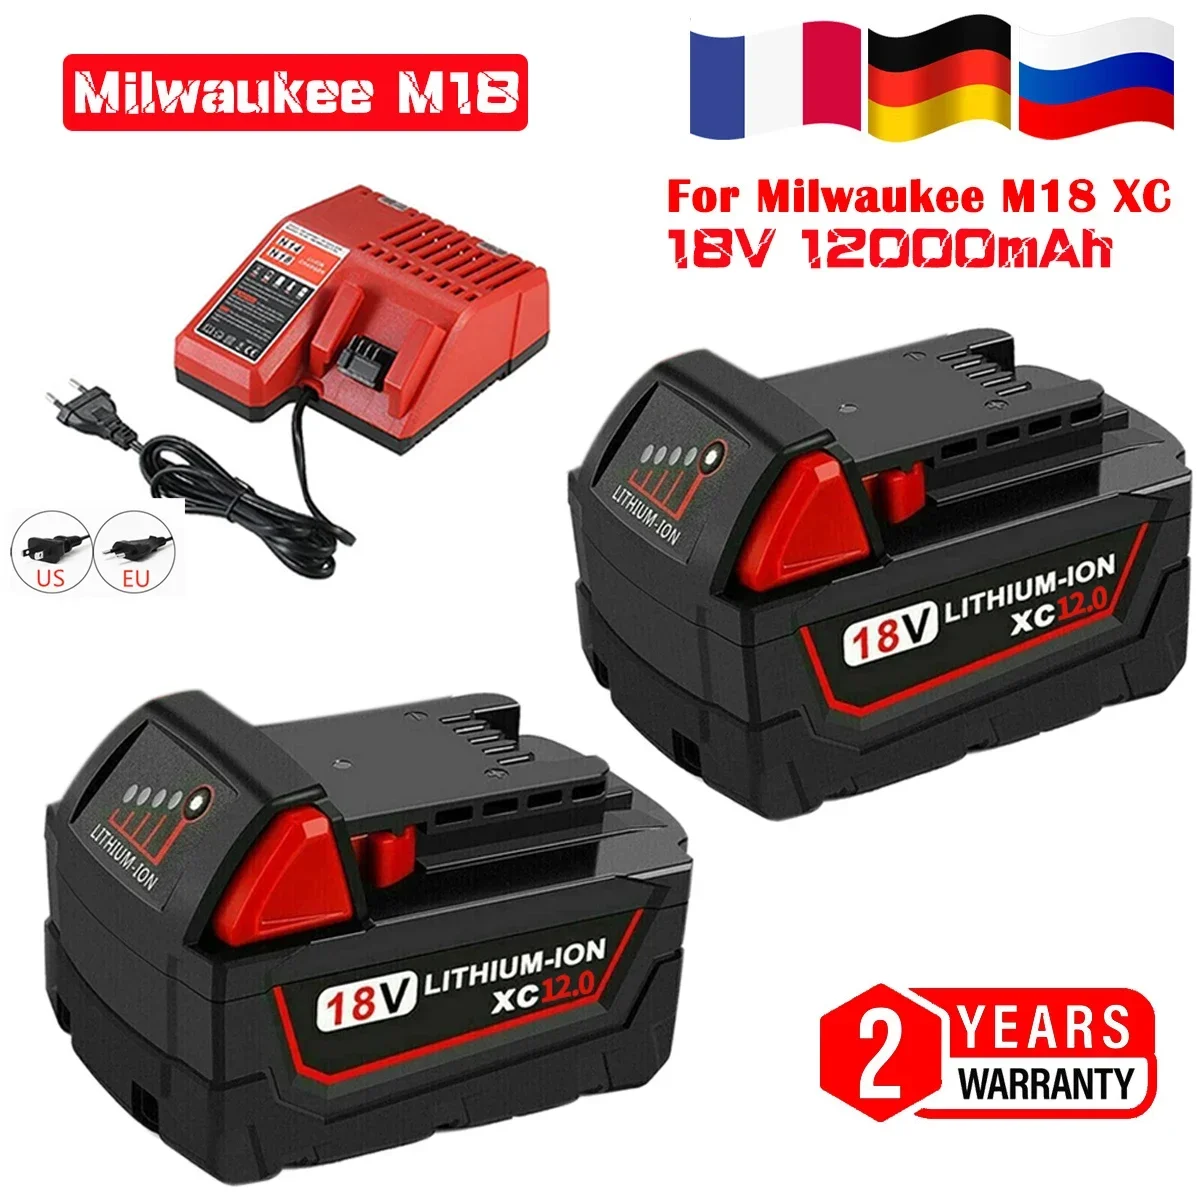 

18V 9000mAh M18 XC Li-Ion Replacement Battery for Milwaukee 48-11-1815 M18B2 M18B4 M18B5 M18B M18B9 M18BX L50 48-11-1860